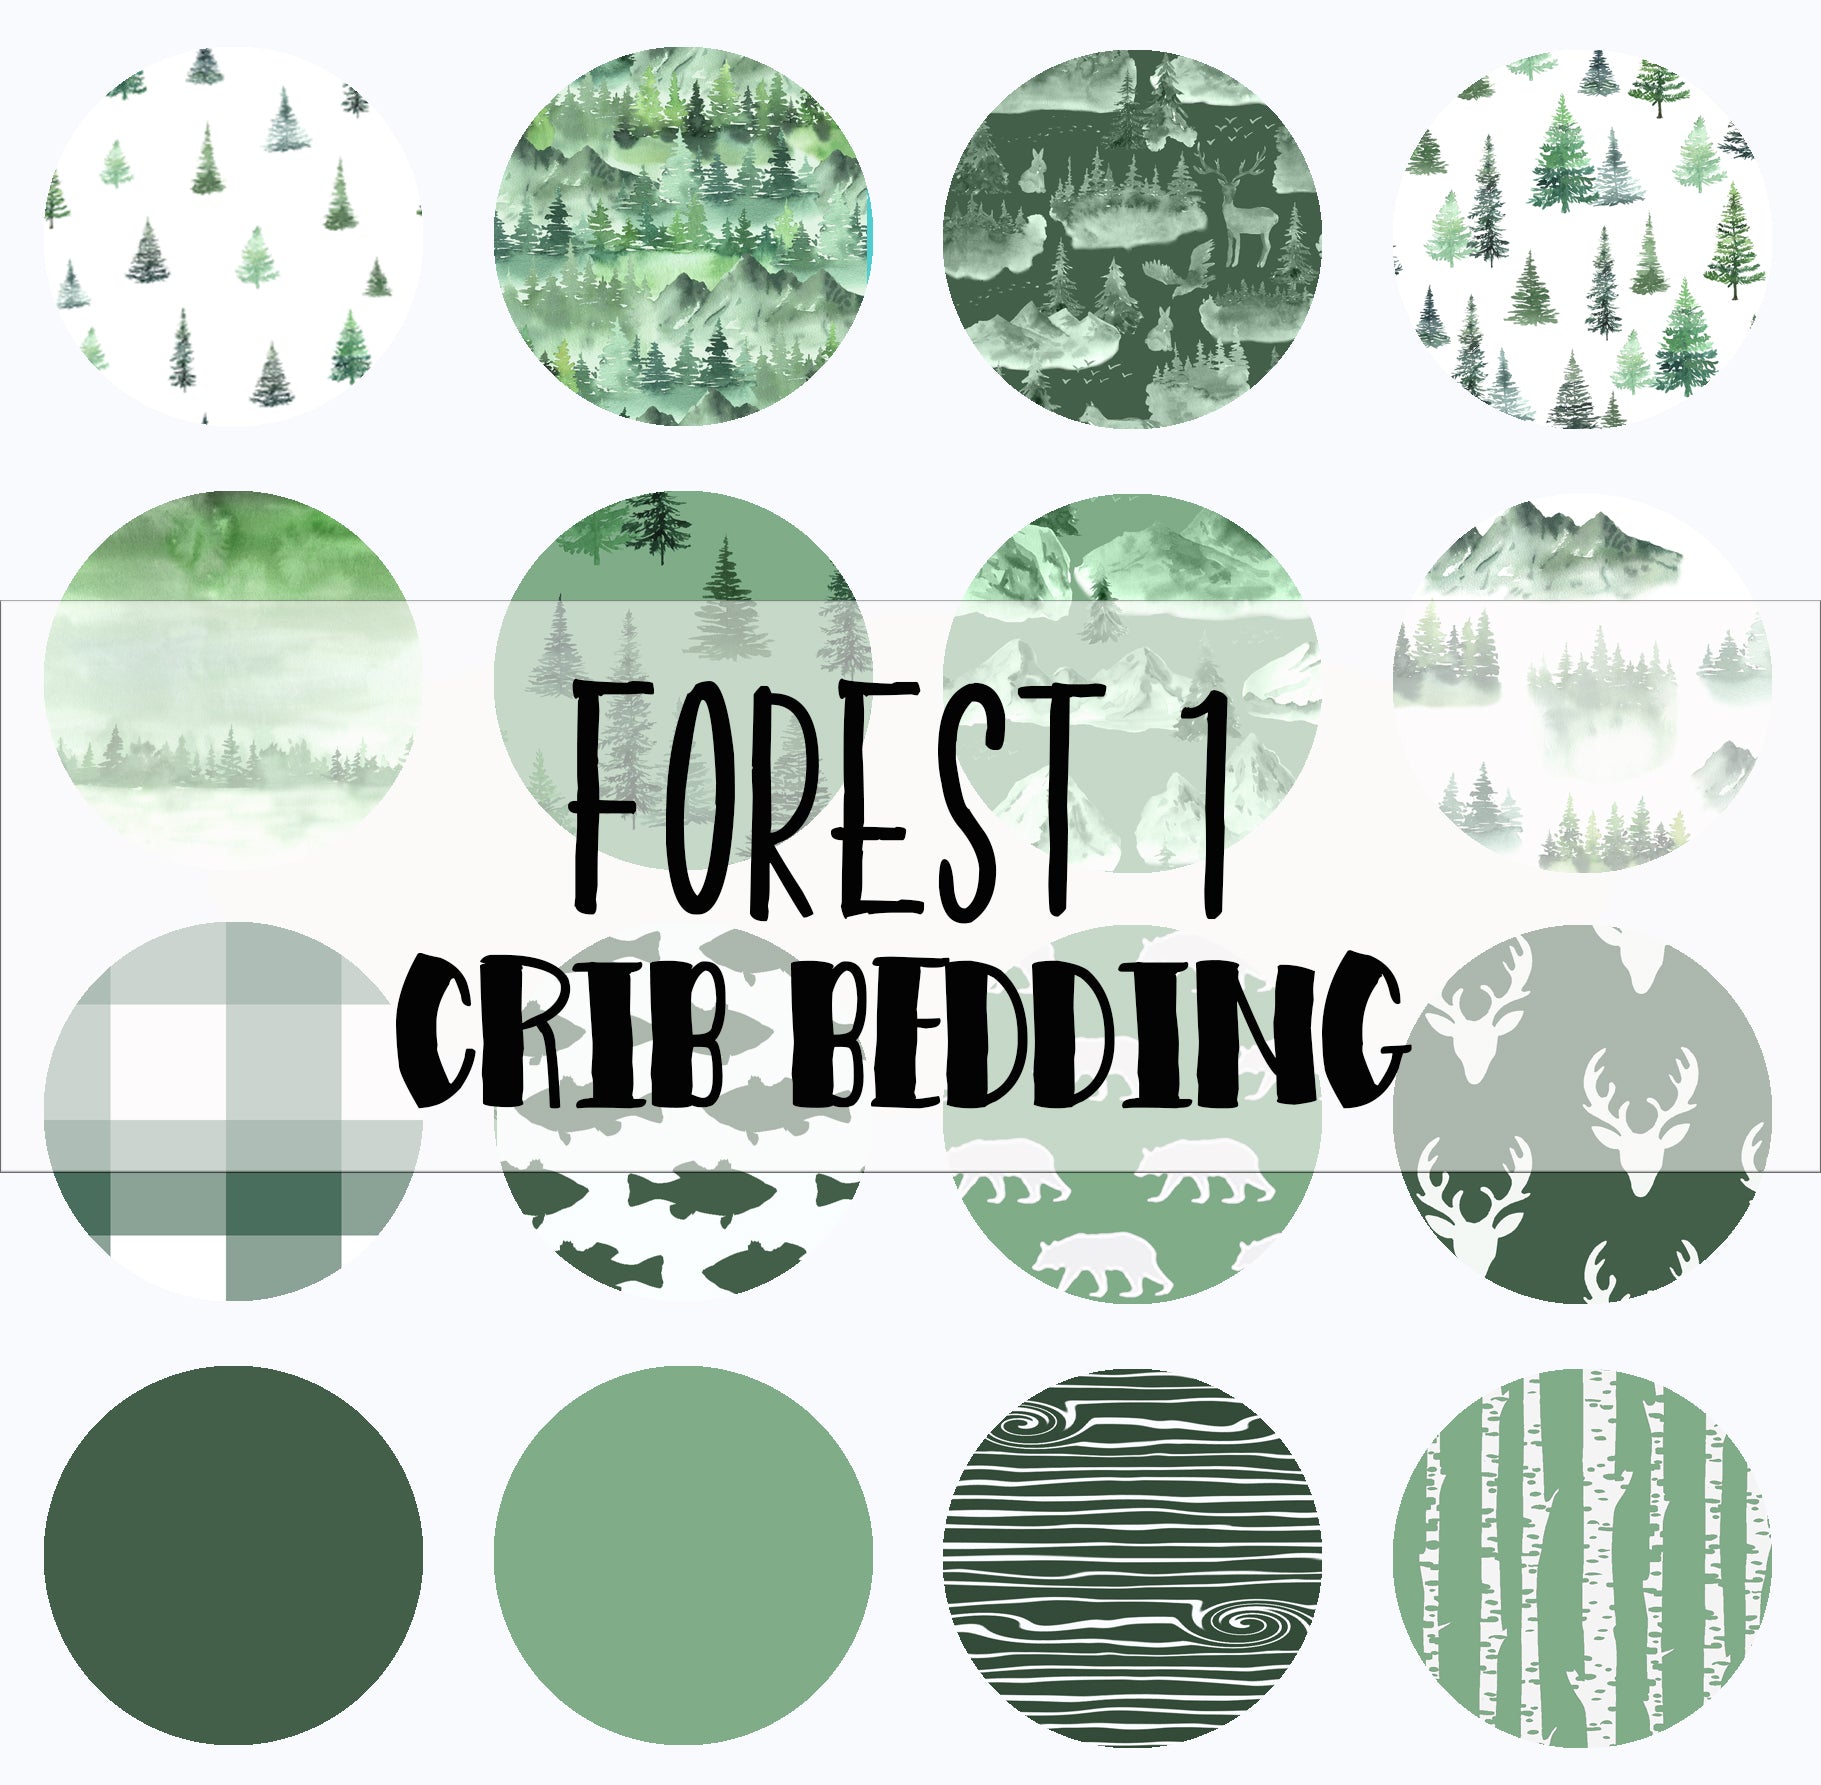 Woodlands Forest Crib Bedding Fabric Options